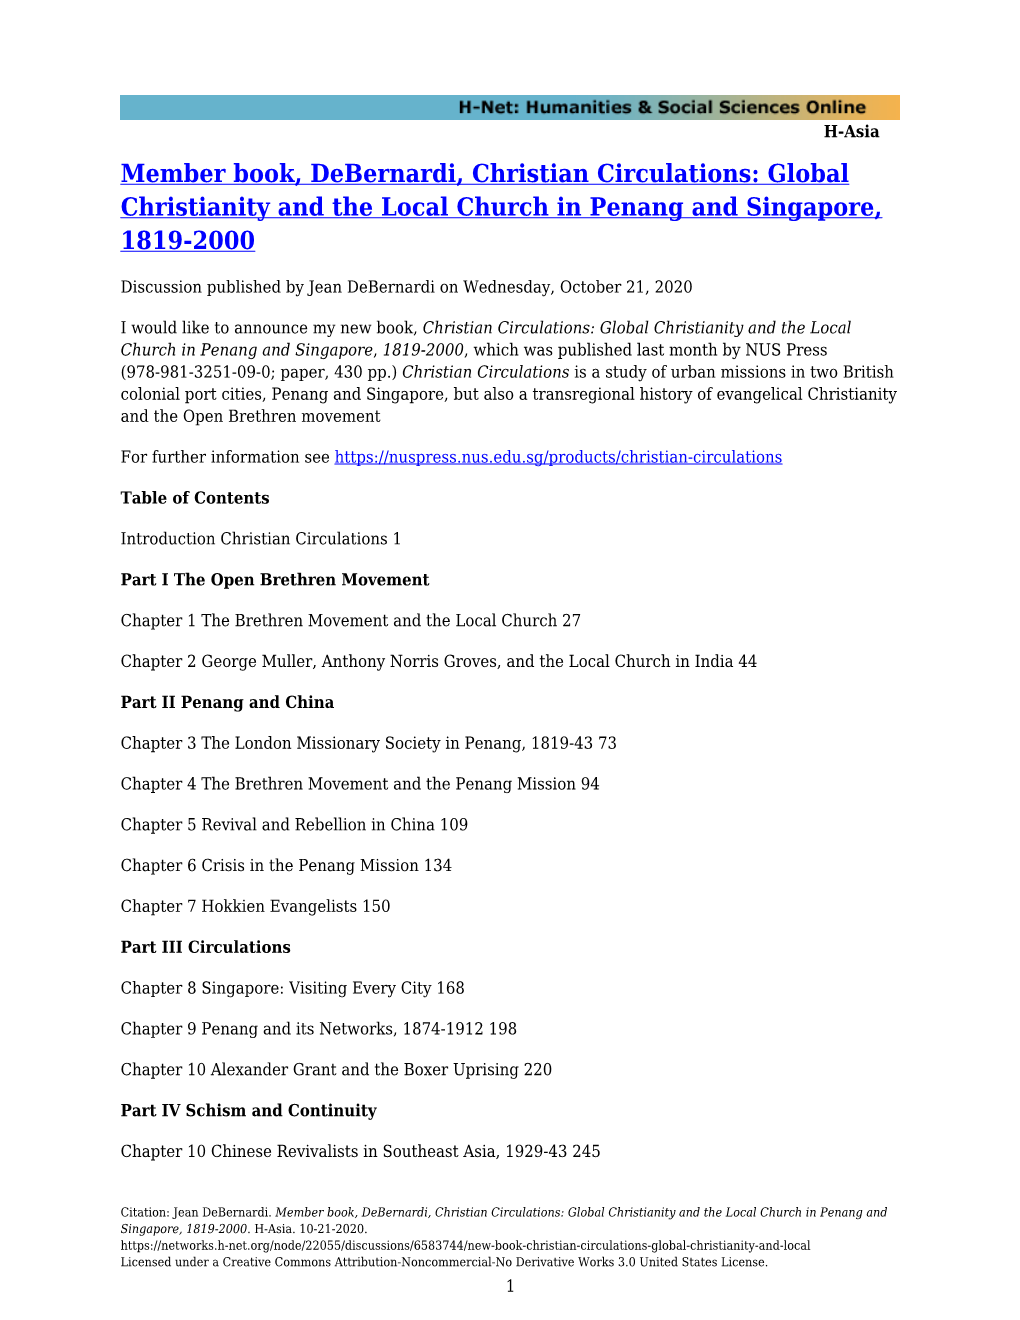 Global Christianity and the Local Church in Penang and Singapore, 1819-2000